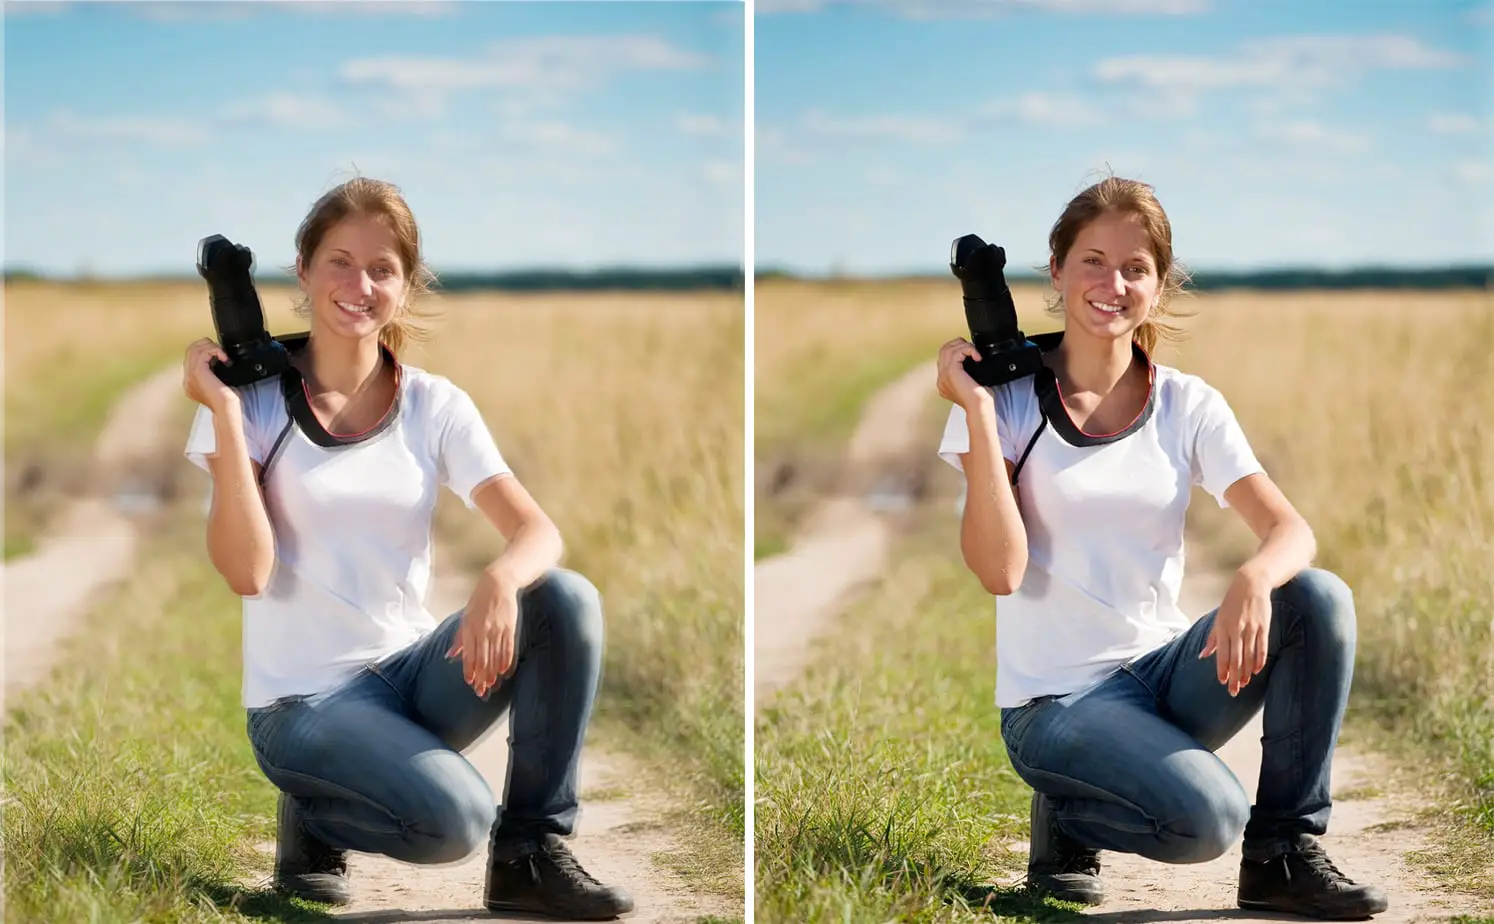 A woman holding a camera in a one-knee bend pose in a grassy field